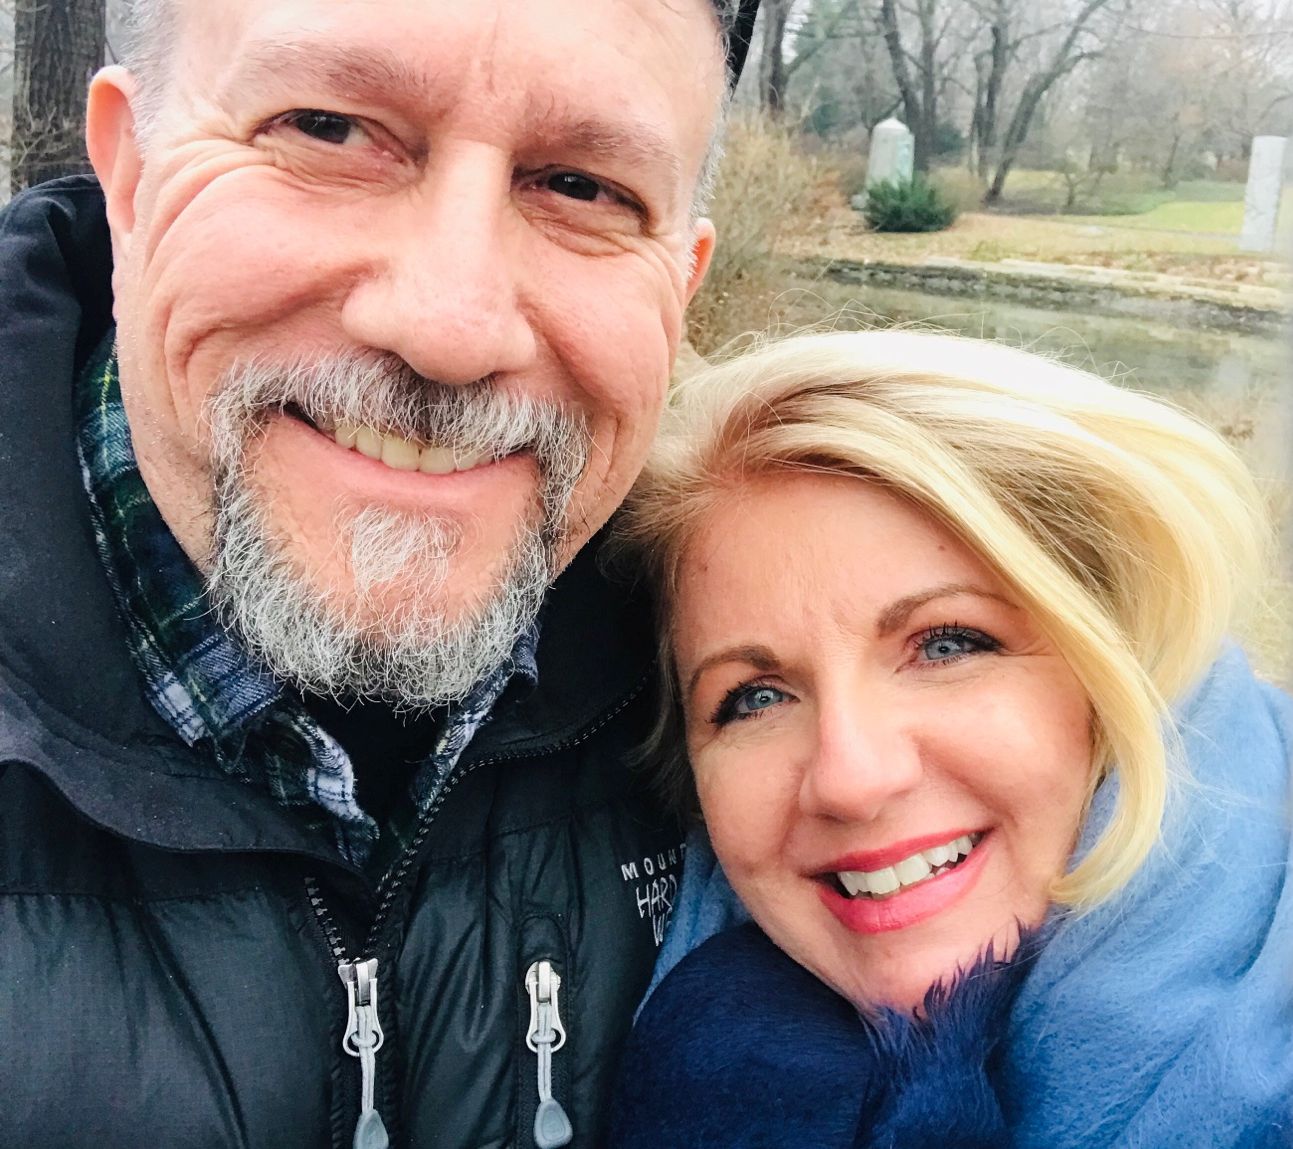 A man in a goatee cuddles next to a woman with beautiful blue eyes, while out in the cold together